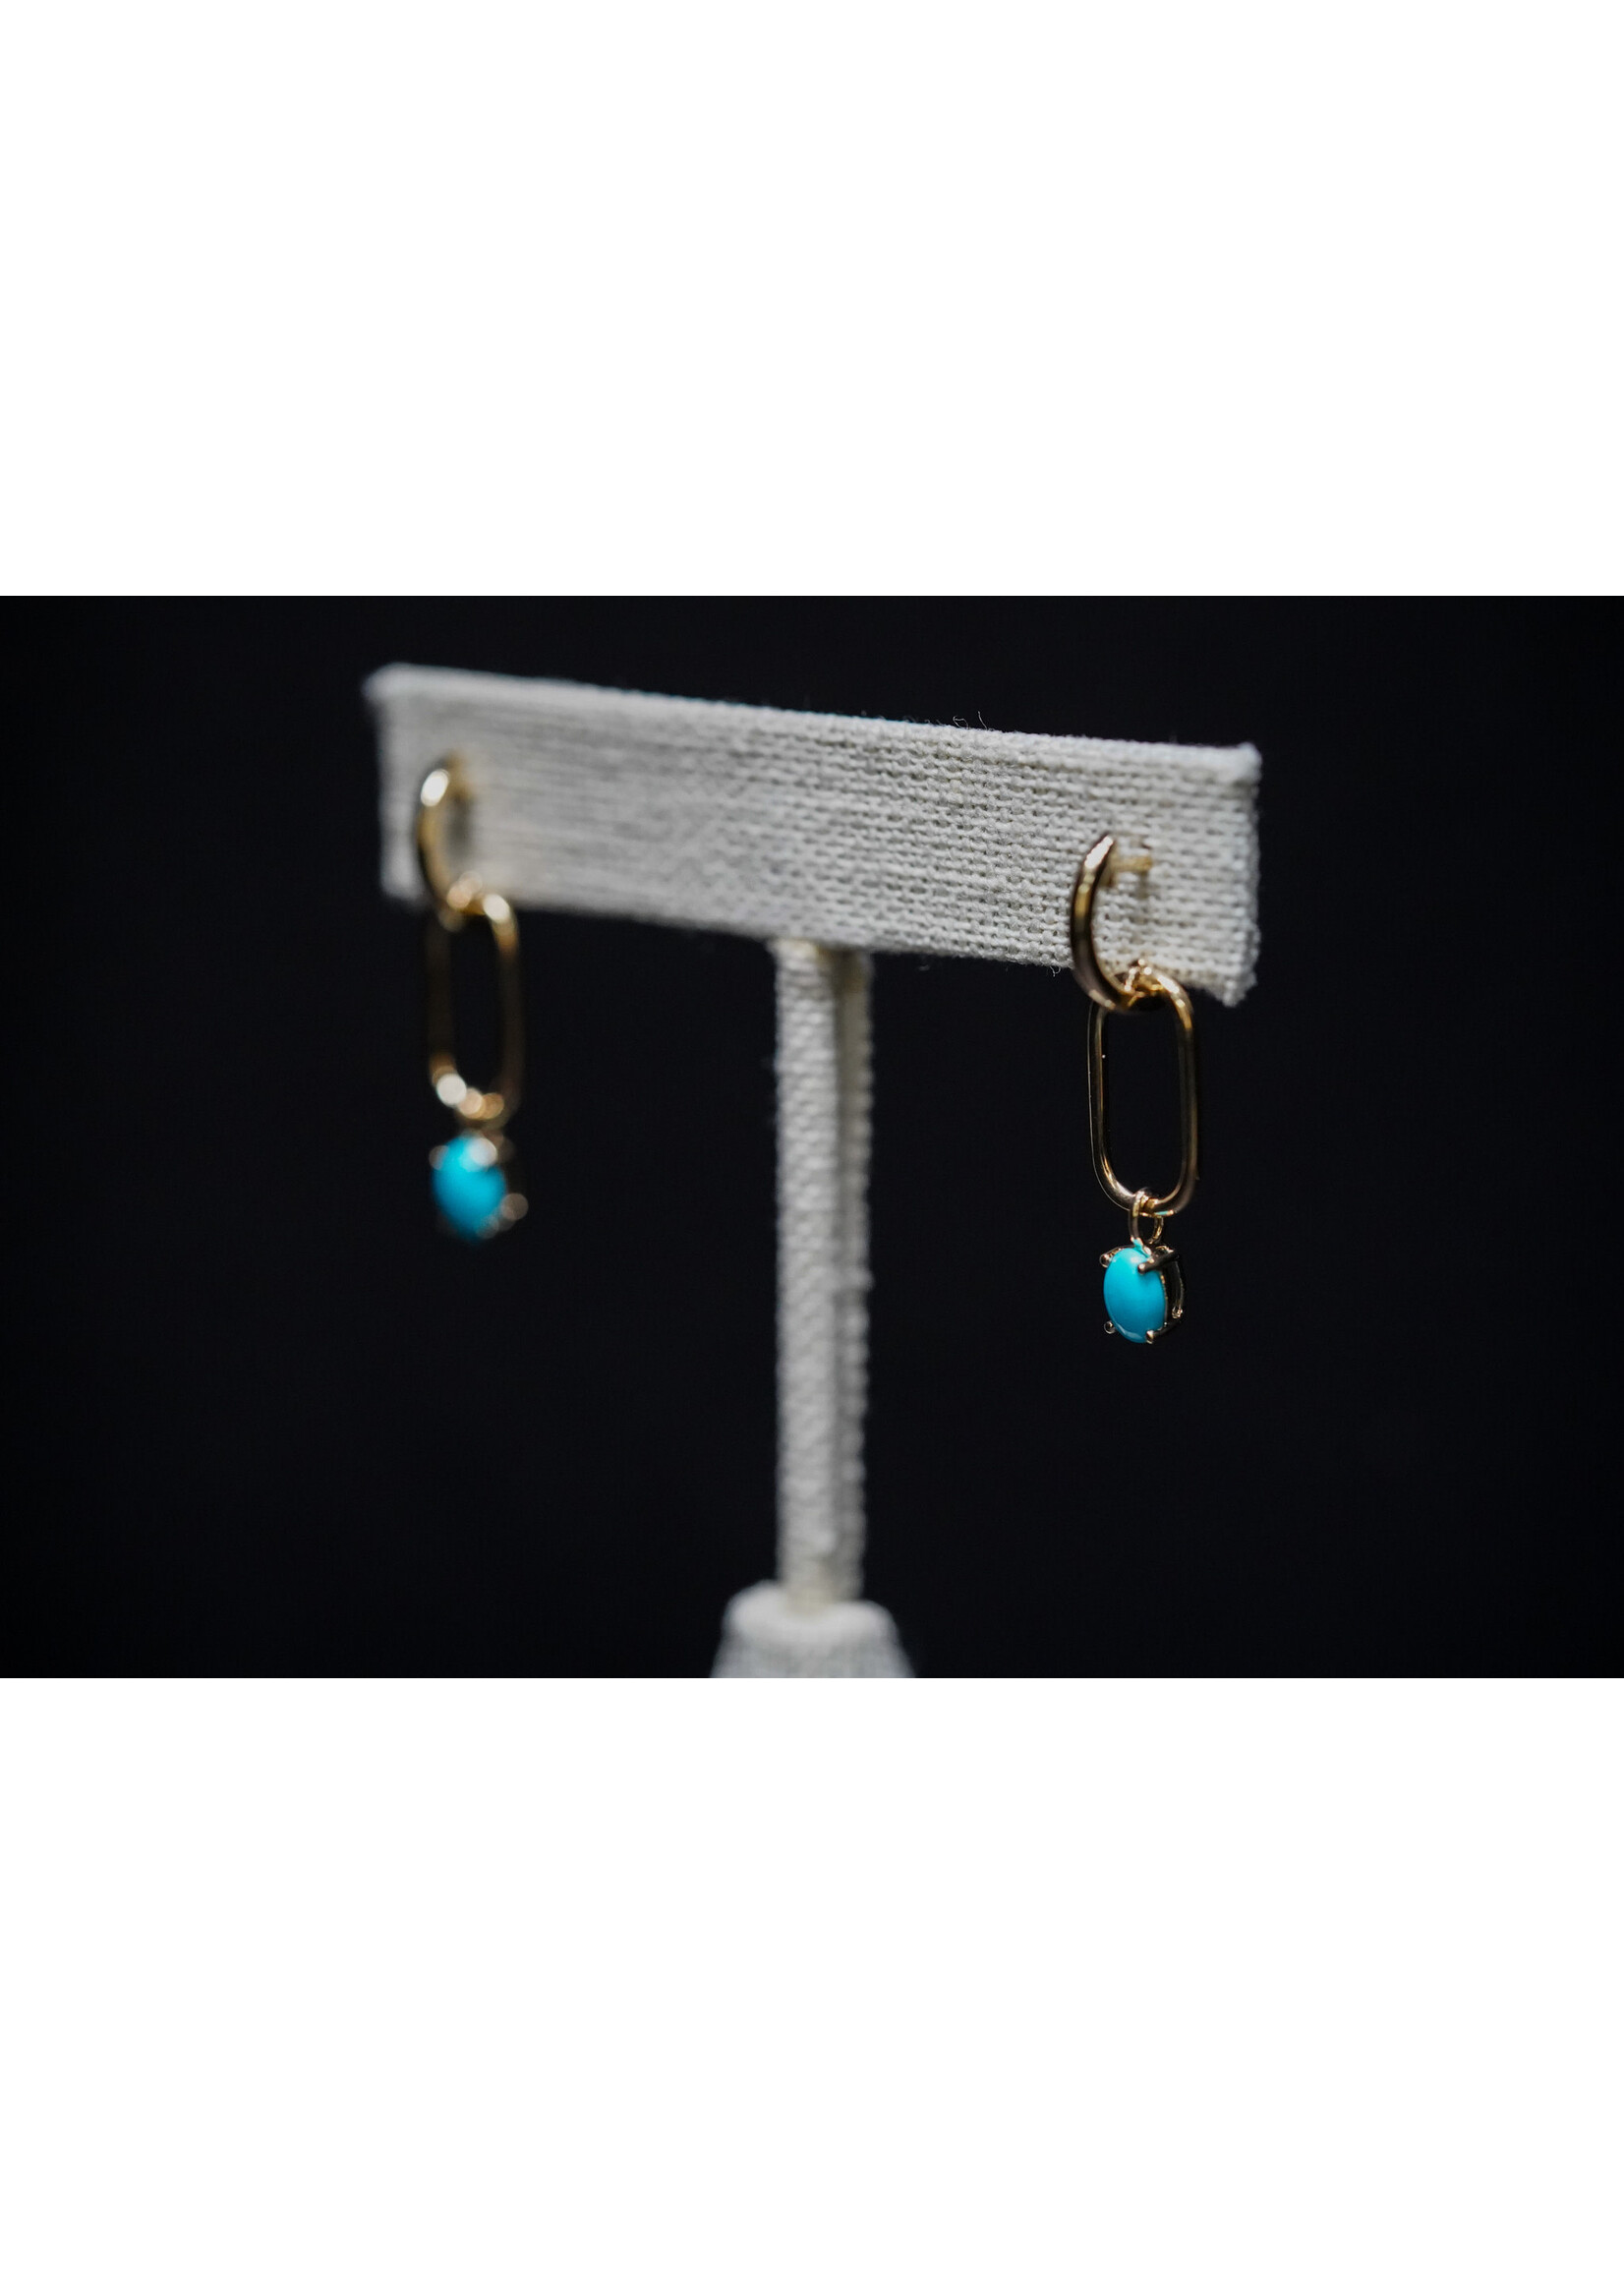 14KY 3.35g 6x4mm Oval Cabachon Turquoise Paperclip Earrings